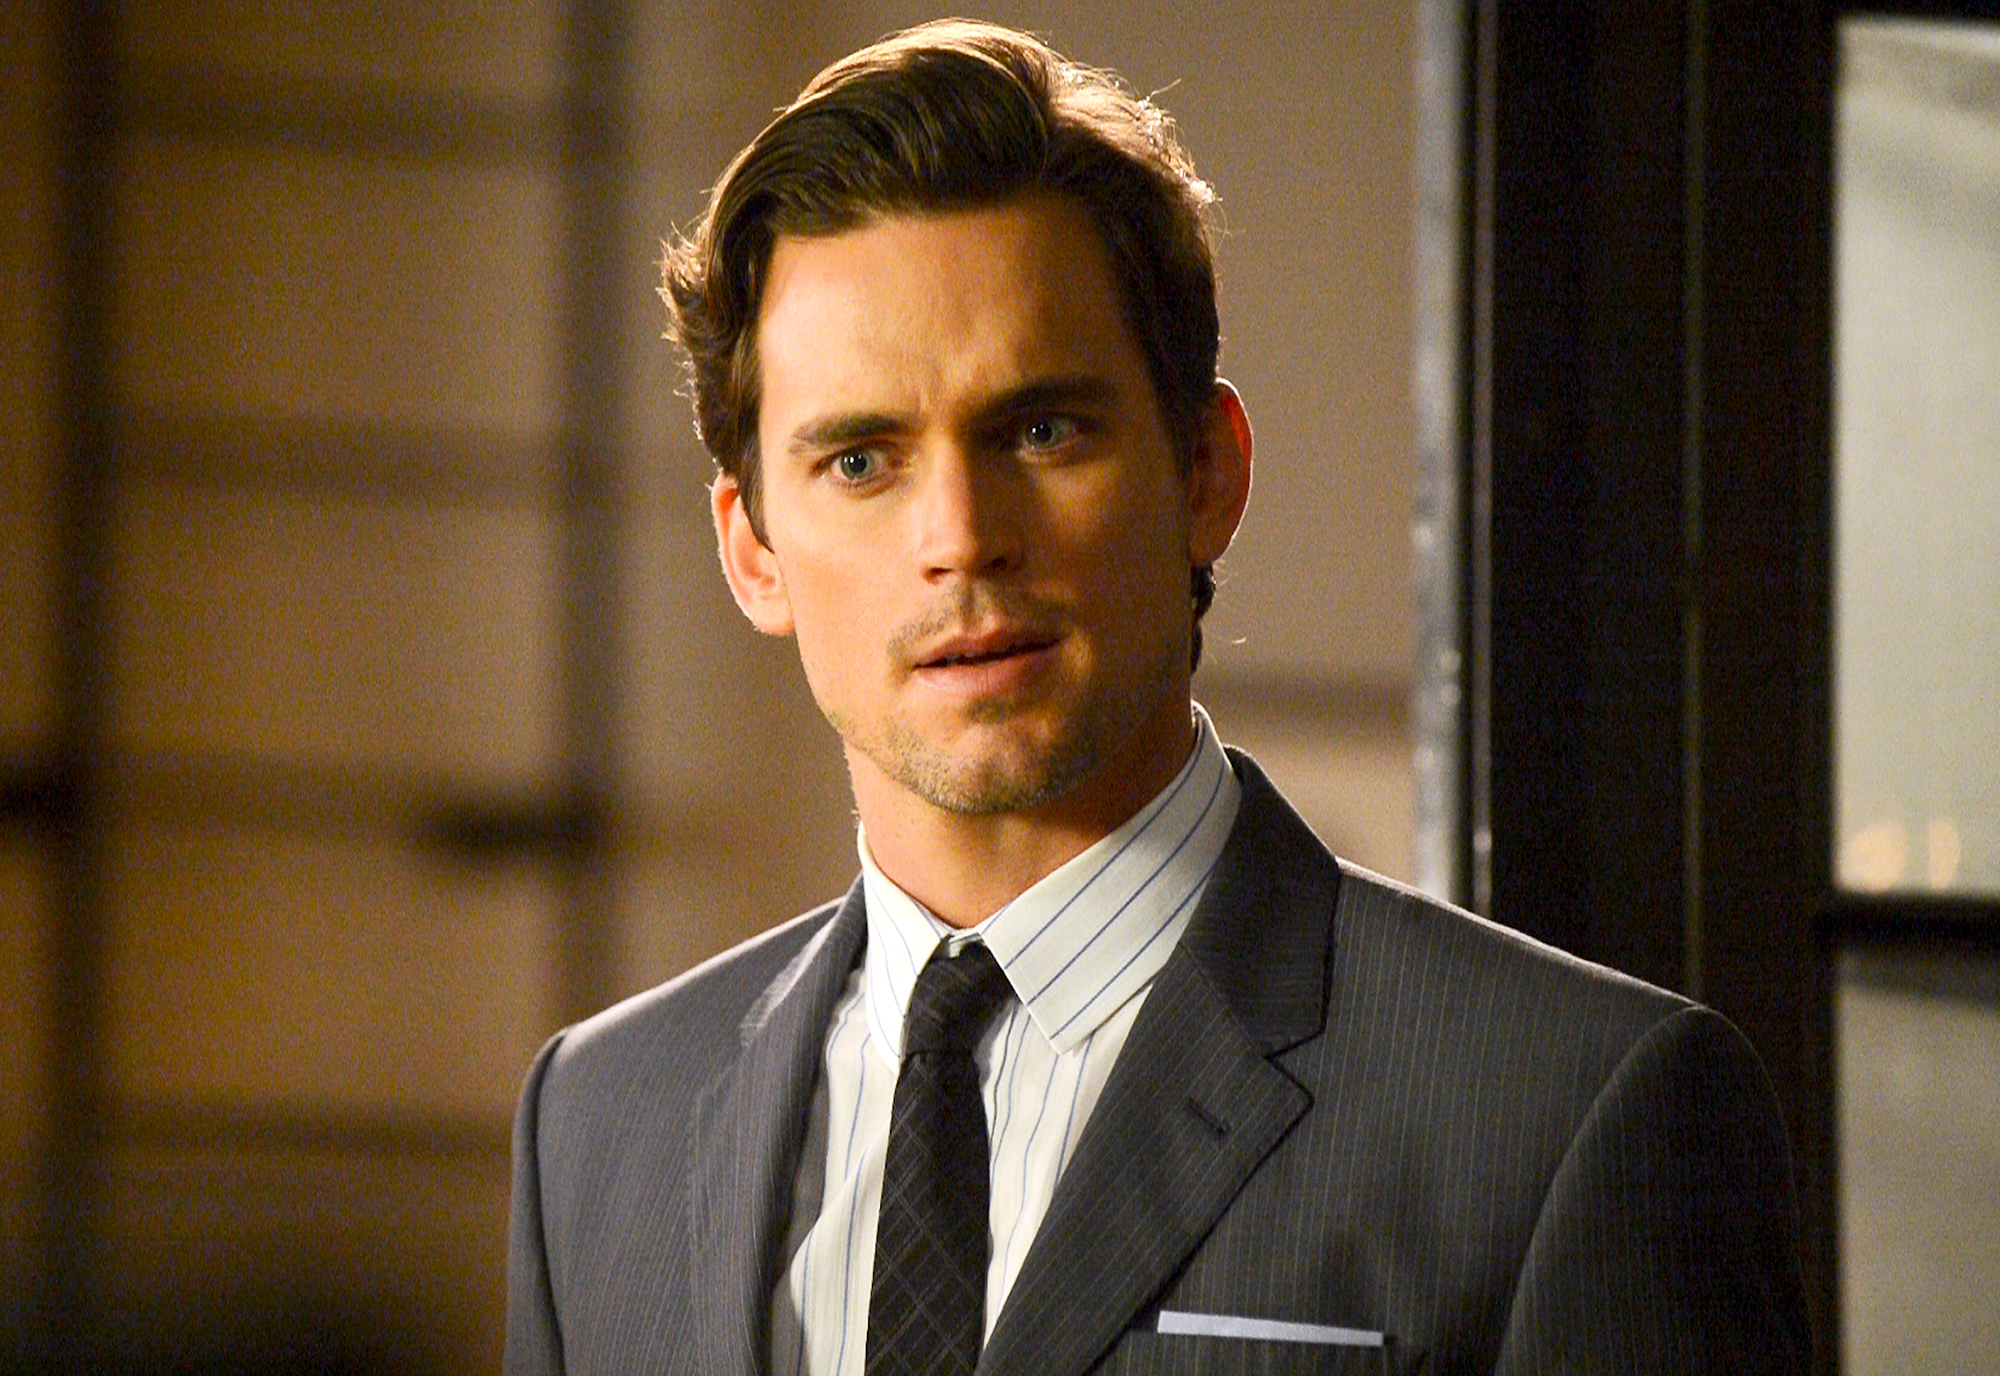 Is 'White Collar' Coming Back? Matt Bomer Says There Are 'Real